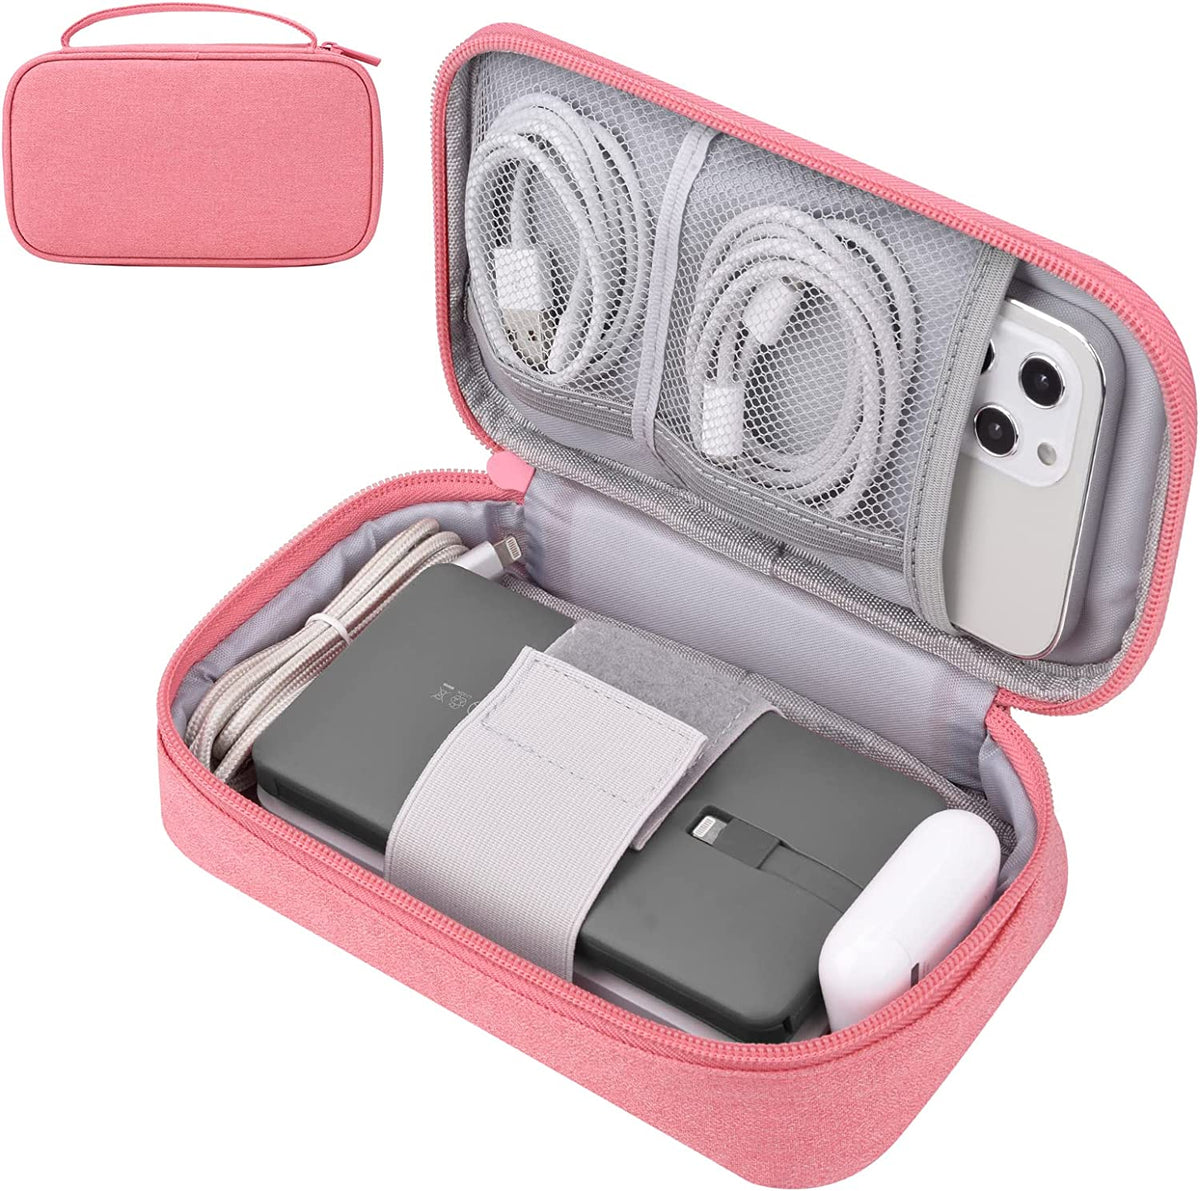 Portable Power Bank Case, Charger Organizer Travel Pouch Bag for External Hard Drive & Tech Accessories (Small, Pink)